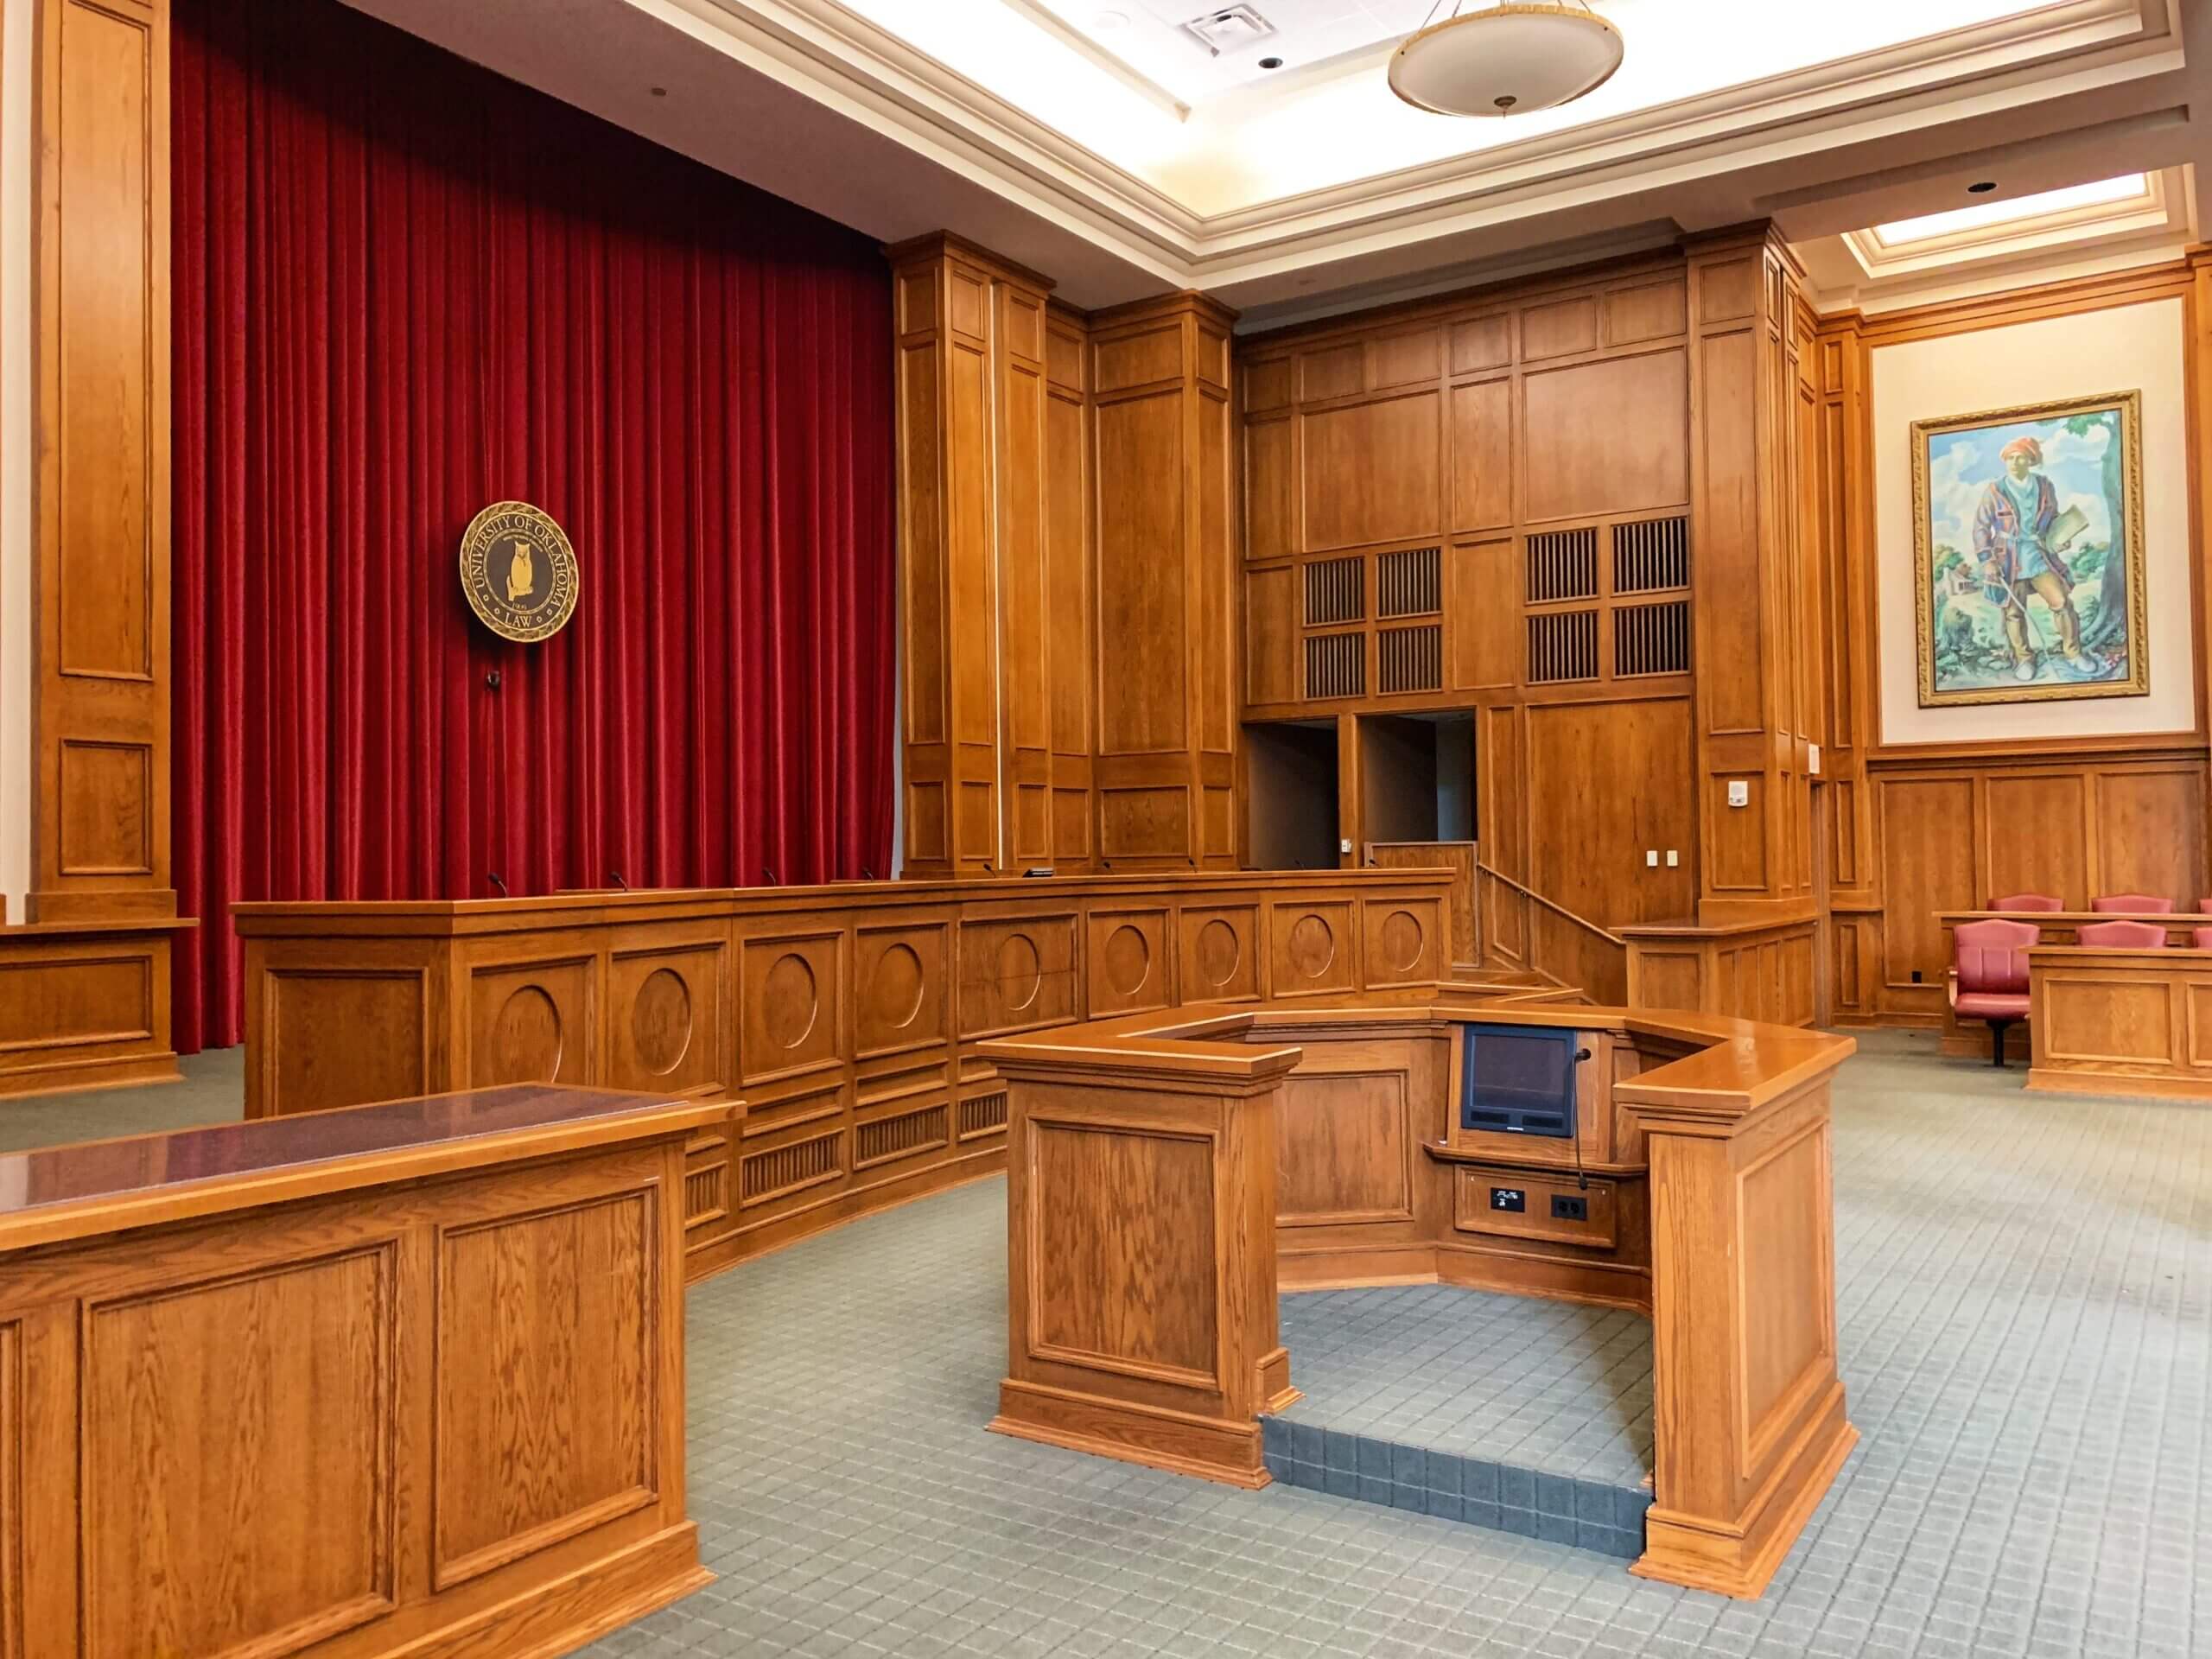 Trial Process for a Maryland Car Accident